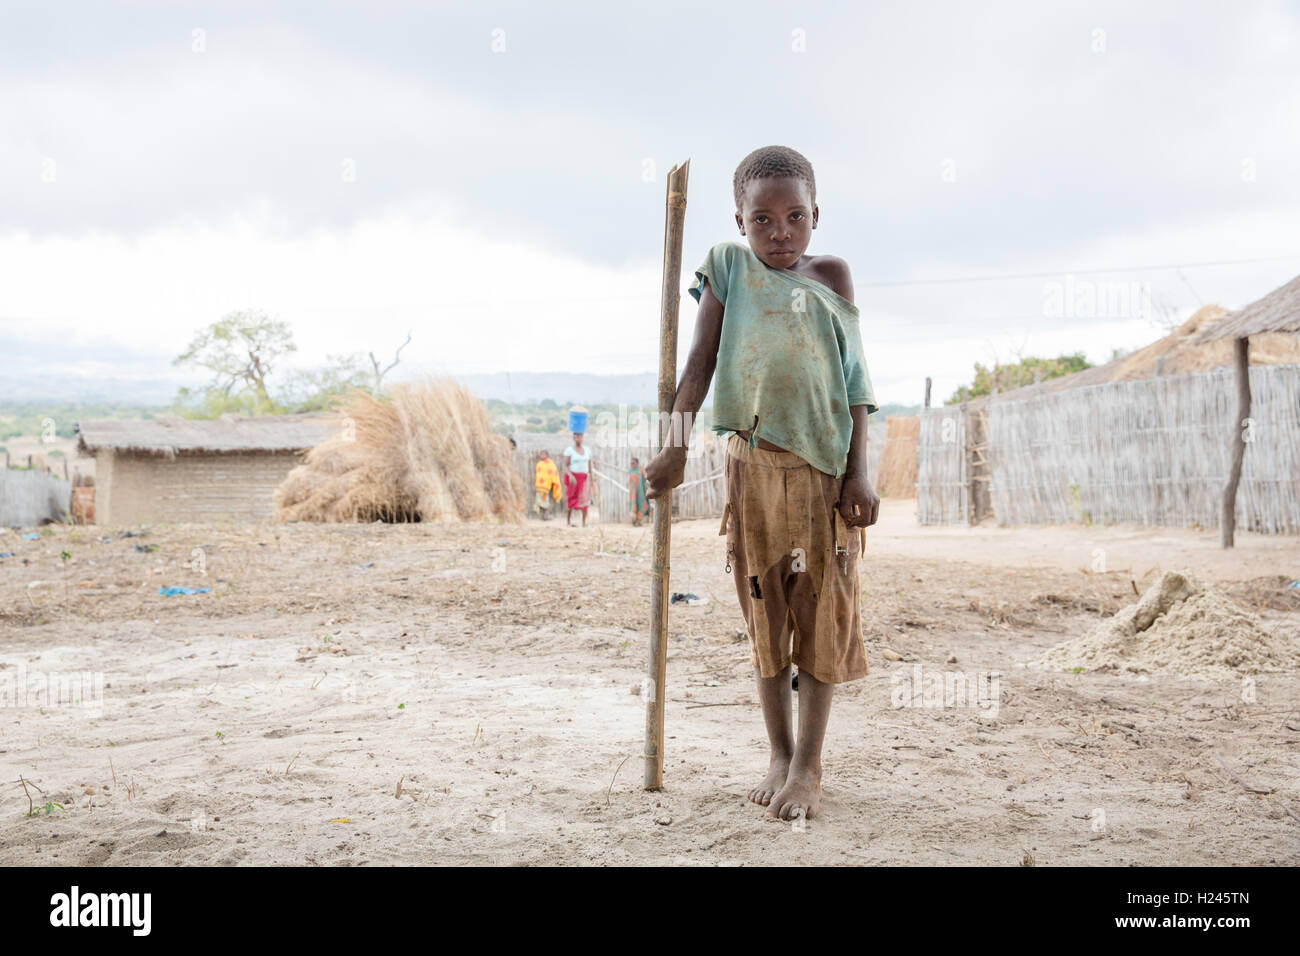 Cavaia village, Chica district . Nampula Province, Mozambique, August 2015: Tominho Alberto, 8 years old.  His parents are farmers.  Photo by Mike Goldwater Stock Photo